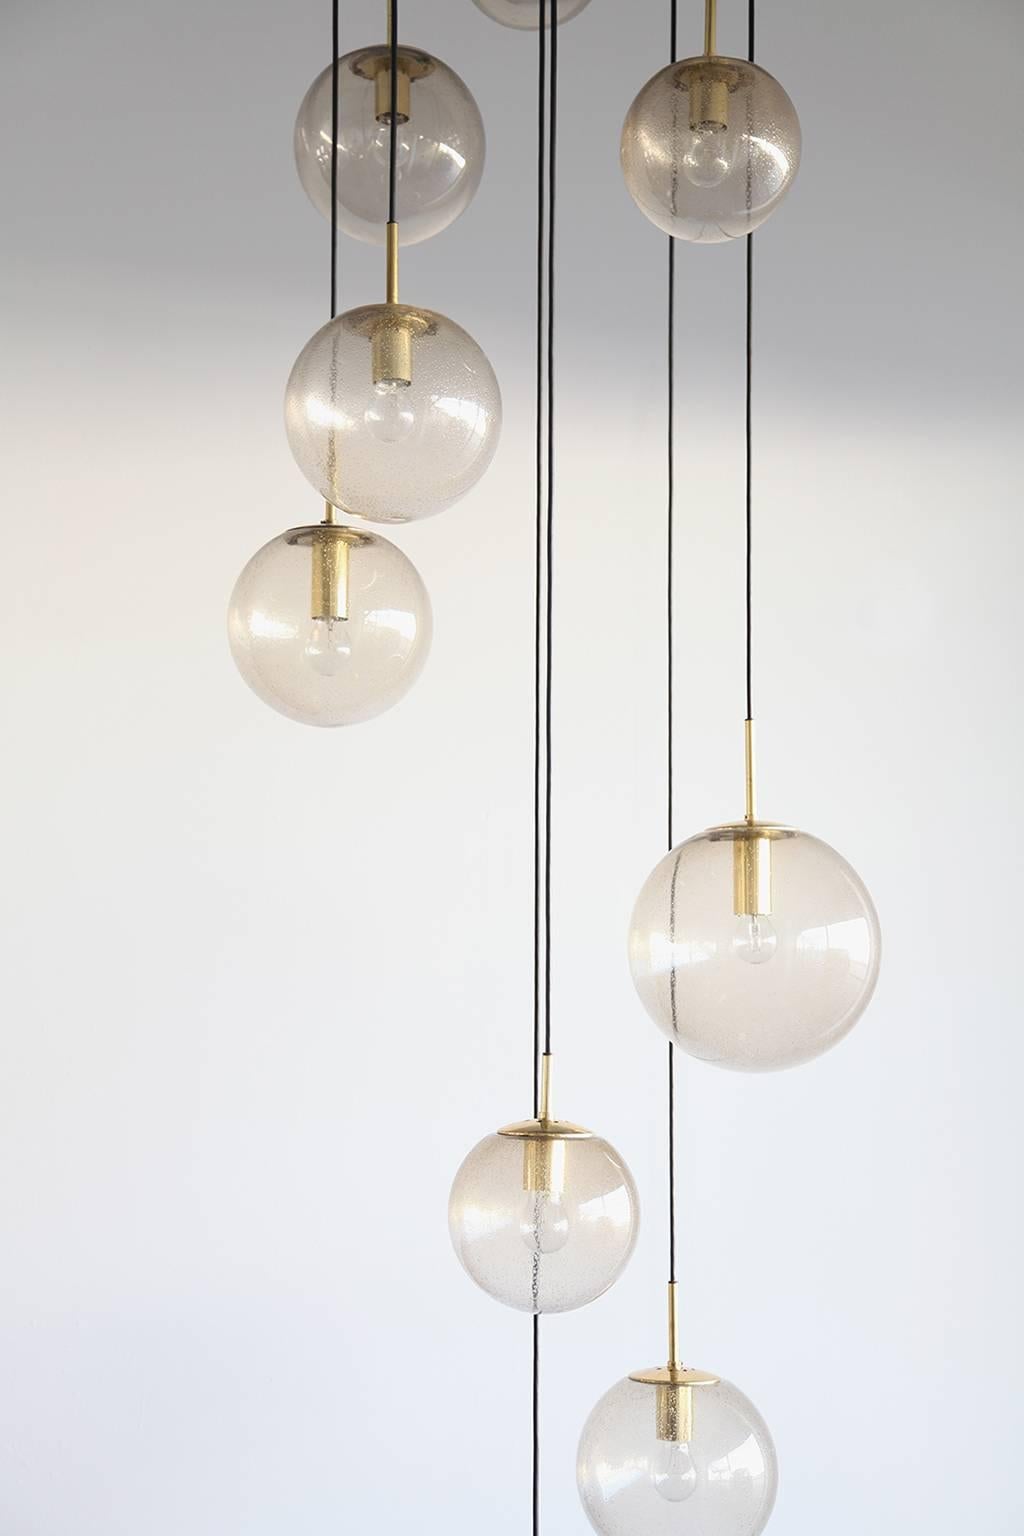 Huge and elegant cascade lamp from the 1960s. The length of each glass can be set individually. The glass is handblown and was manufactured by Limburg. It is accompanied by beautiful brass works.

Dimensions:

Three glass elements Ø 20cm
Four glass